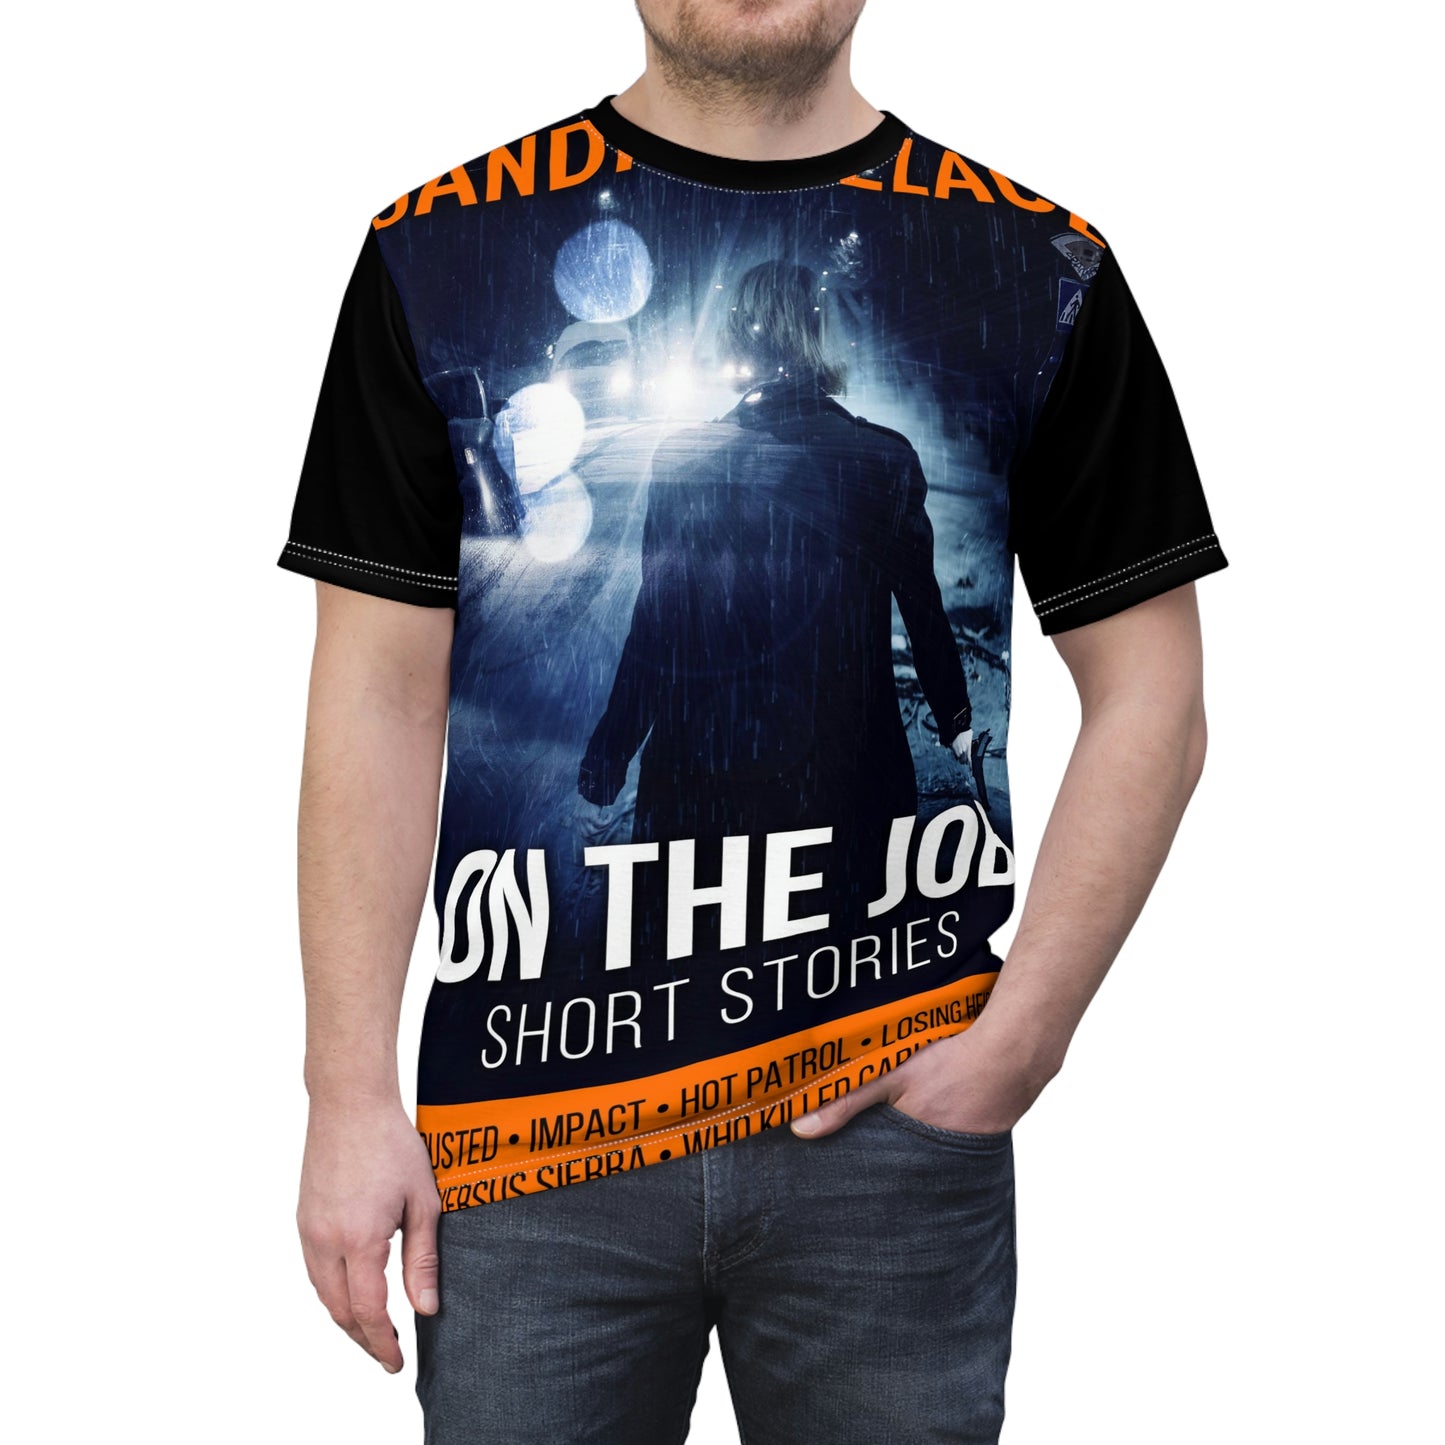 On The Job - Unisex All-Over Print Cut & Sew T-Shirt